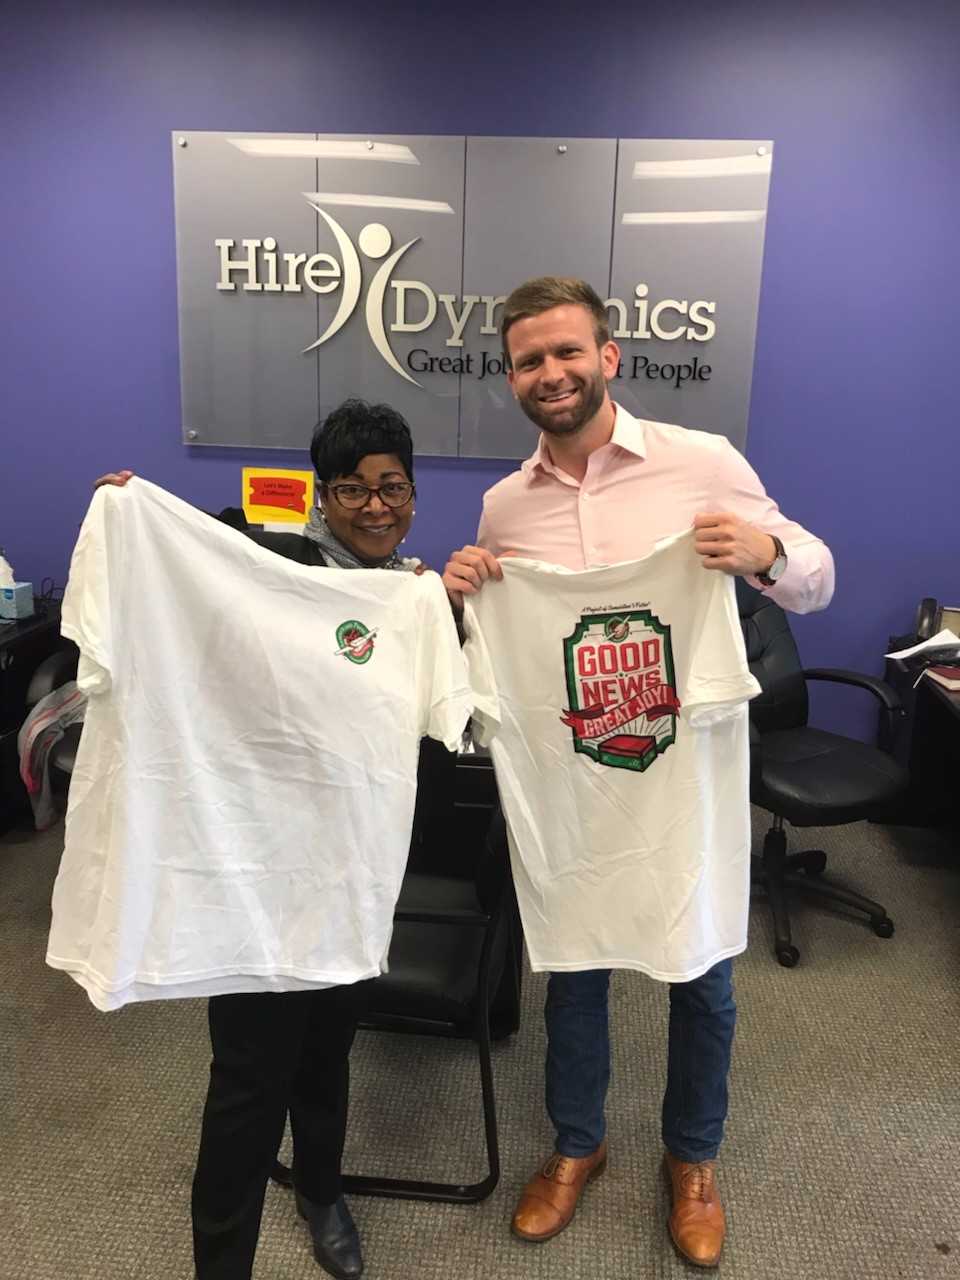 Hire Dynamics and Operation Christmas Child t-shirts